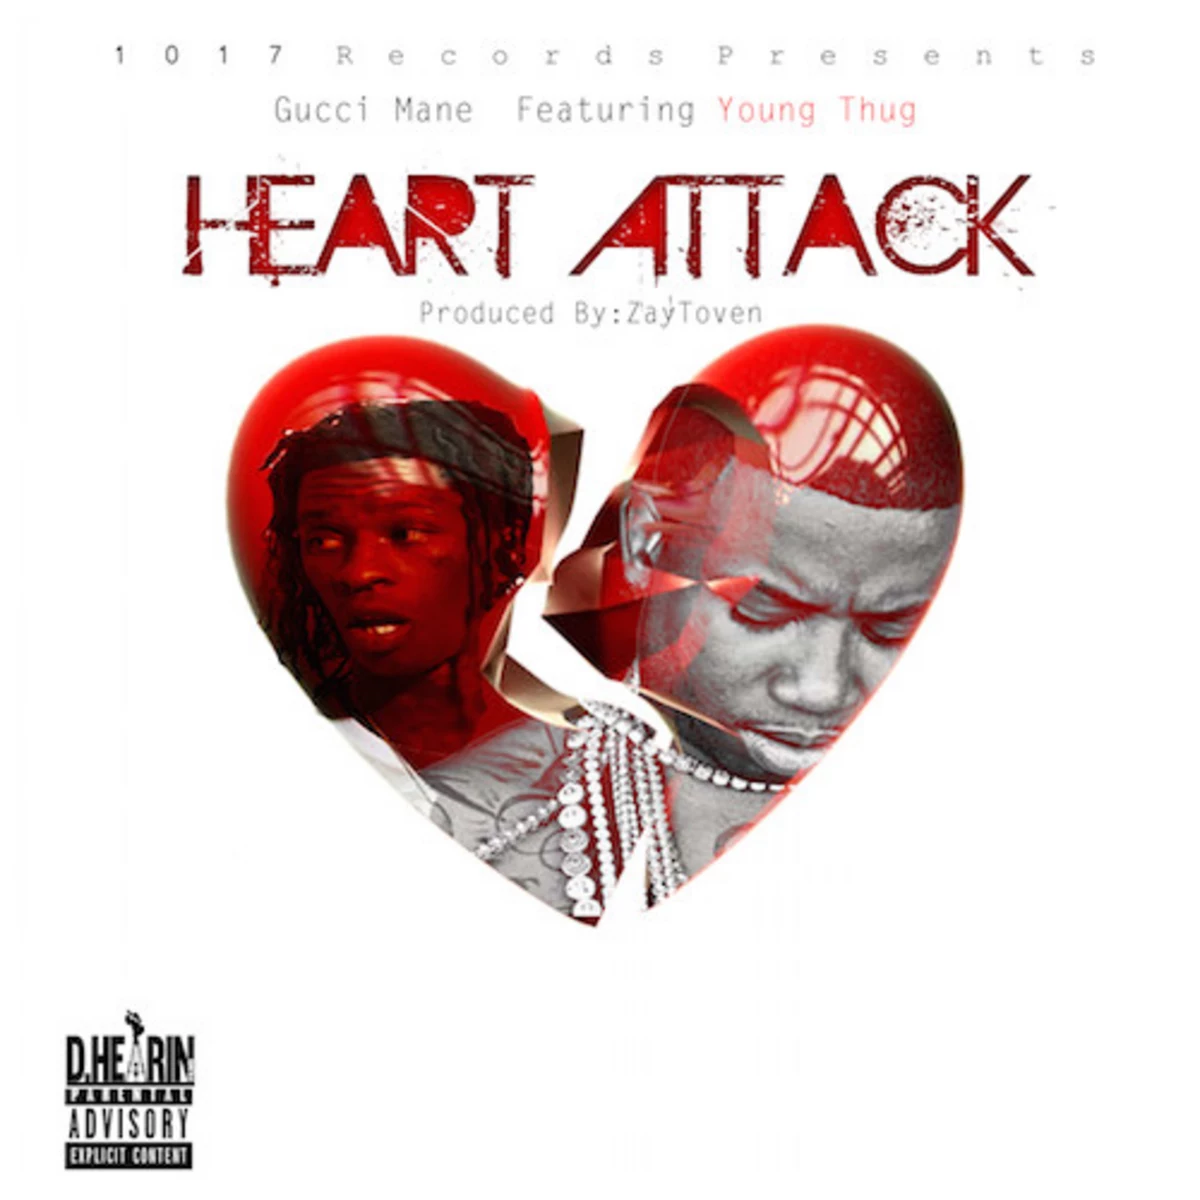 Gucci Mane Featuring Young Thug “Heart Attack” - XXL